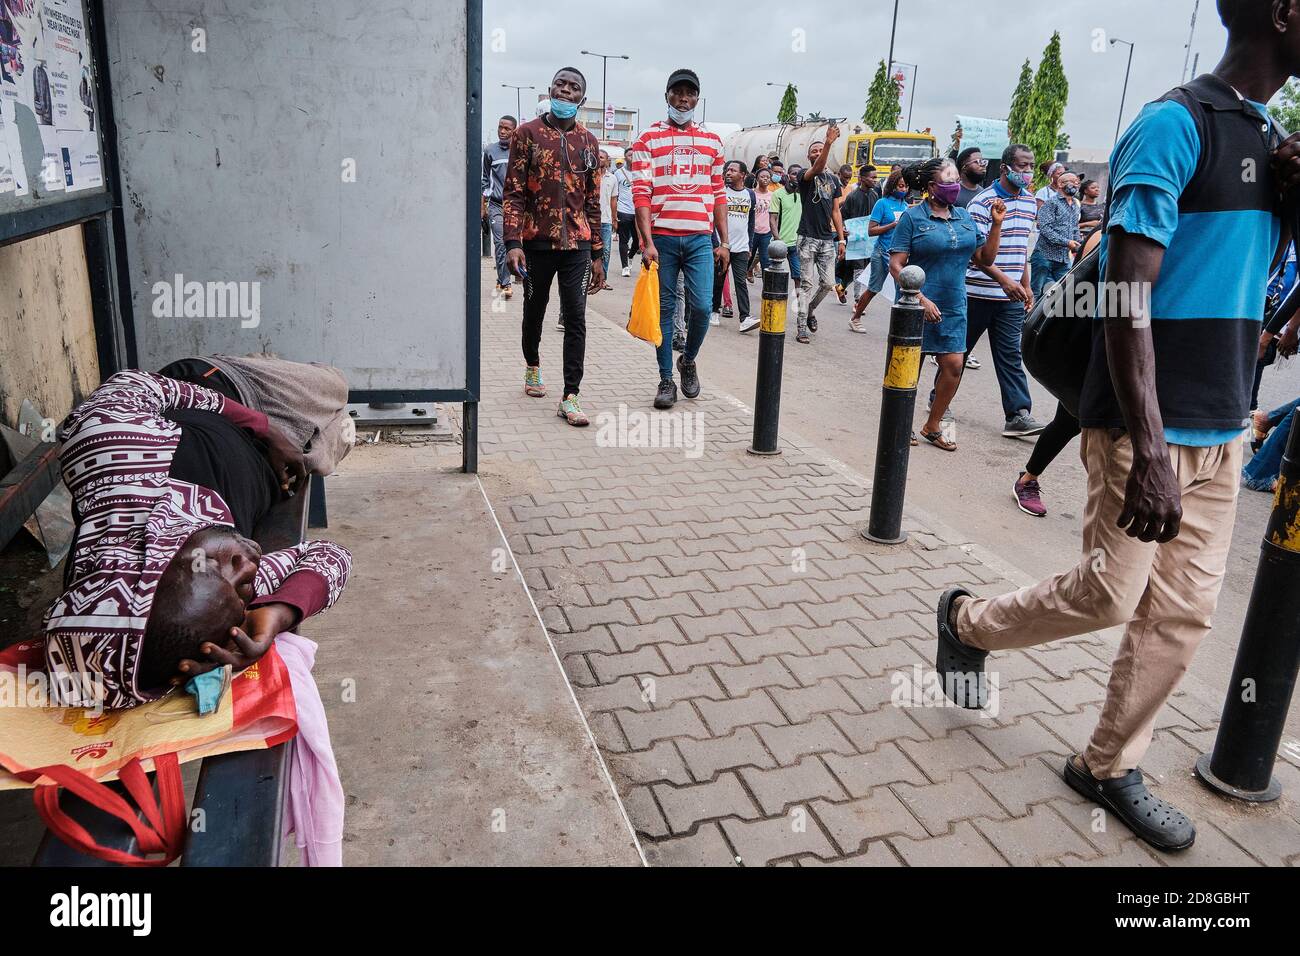 A man sleeps at a bus stop as protesters walk by during protests against police brutality tagged #EndSARS in Lagos Nigeria on October 17, 2020. Stock Photo